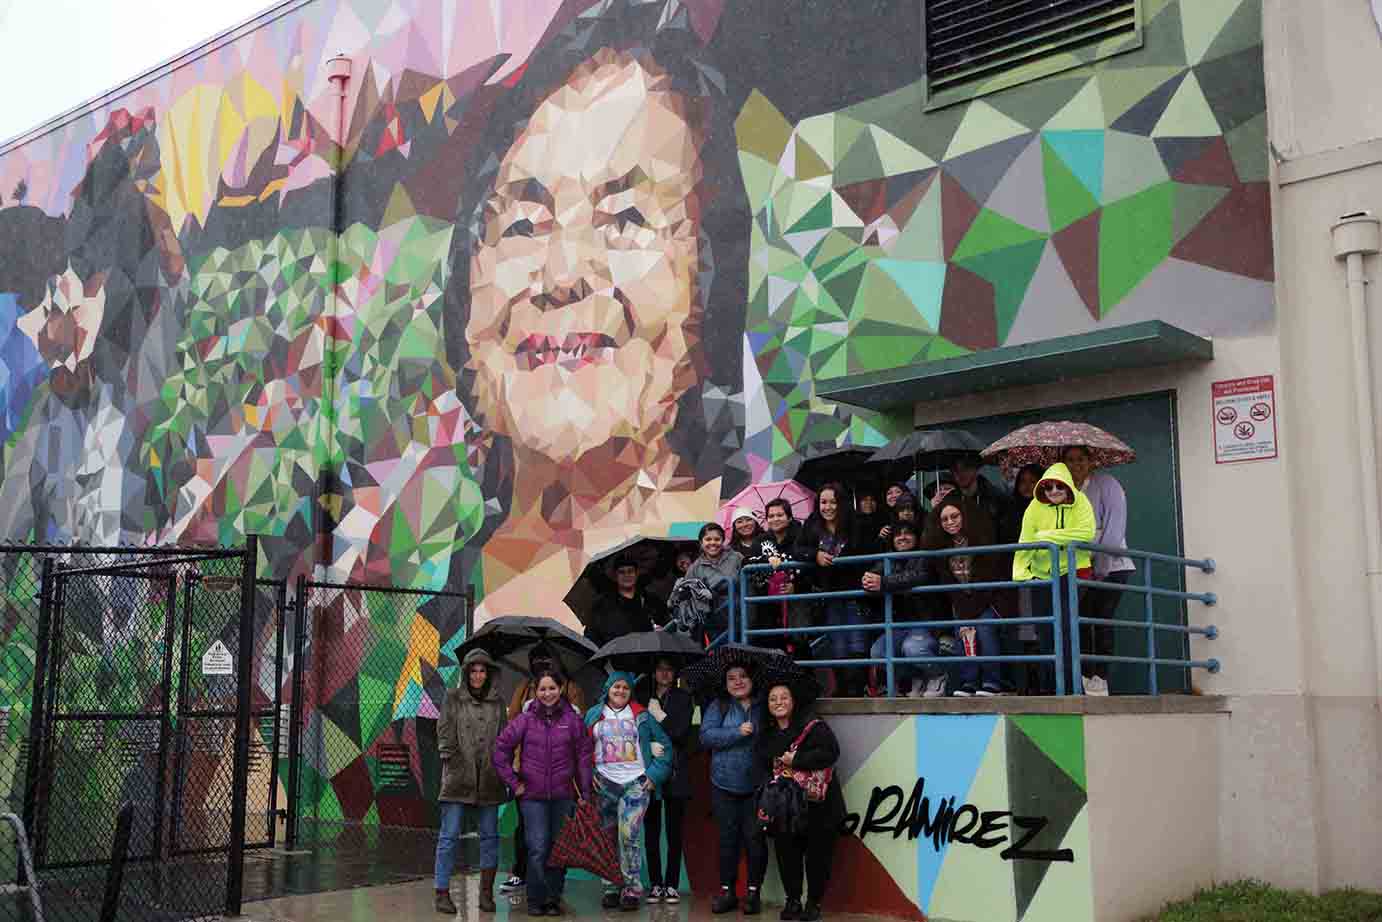 A student-organized bus tour included a stop at a Dolores Huerta mural in Ventura